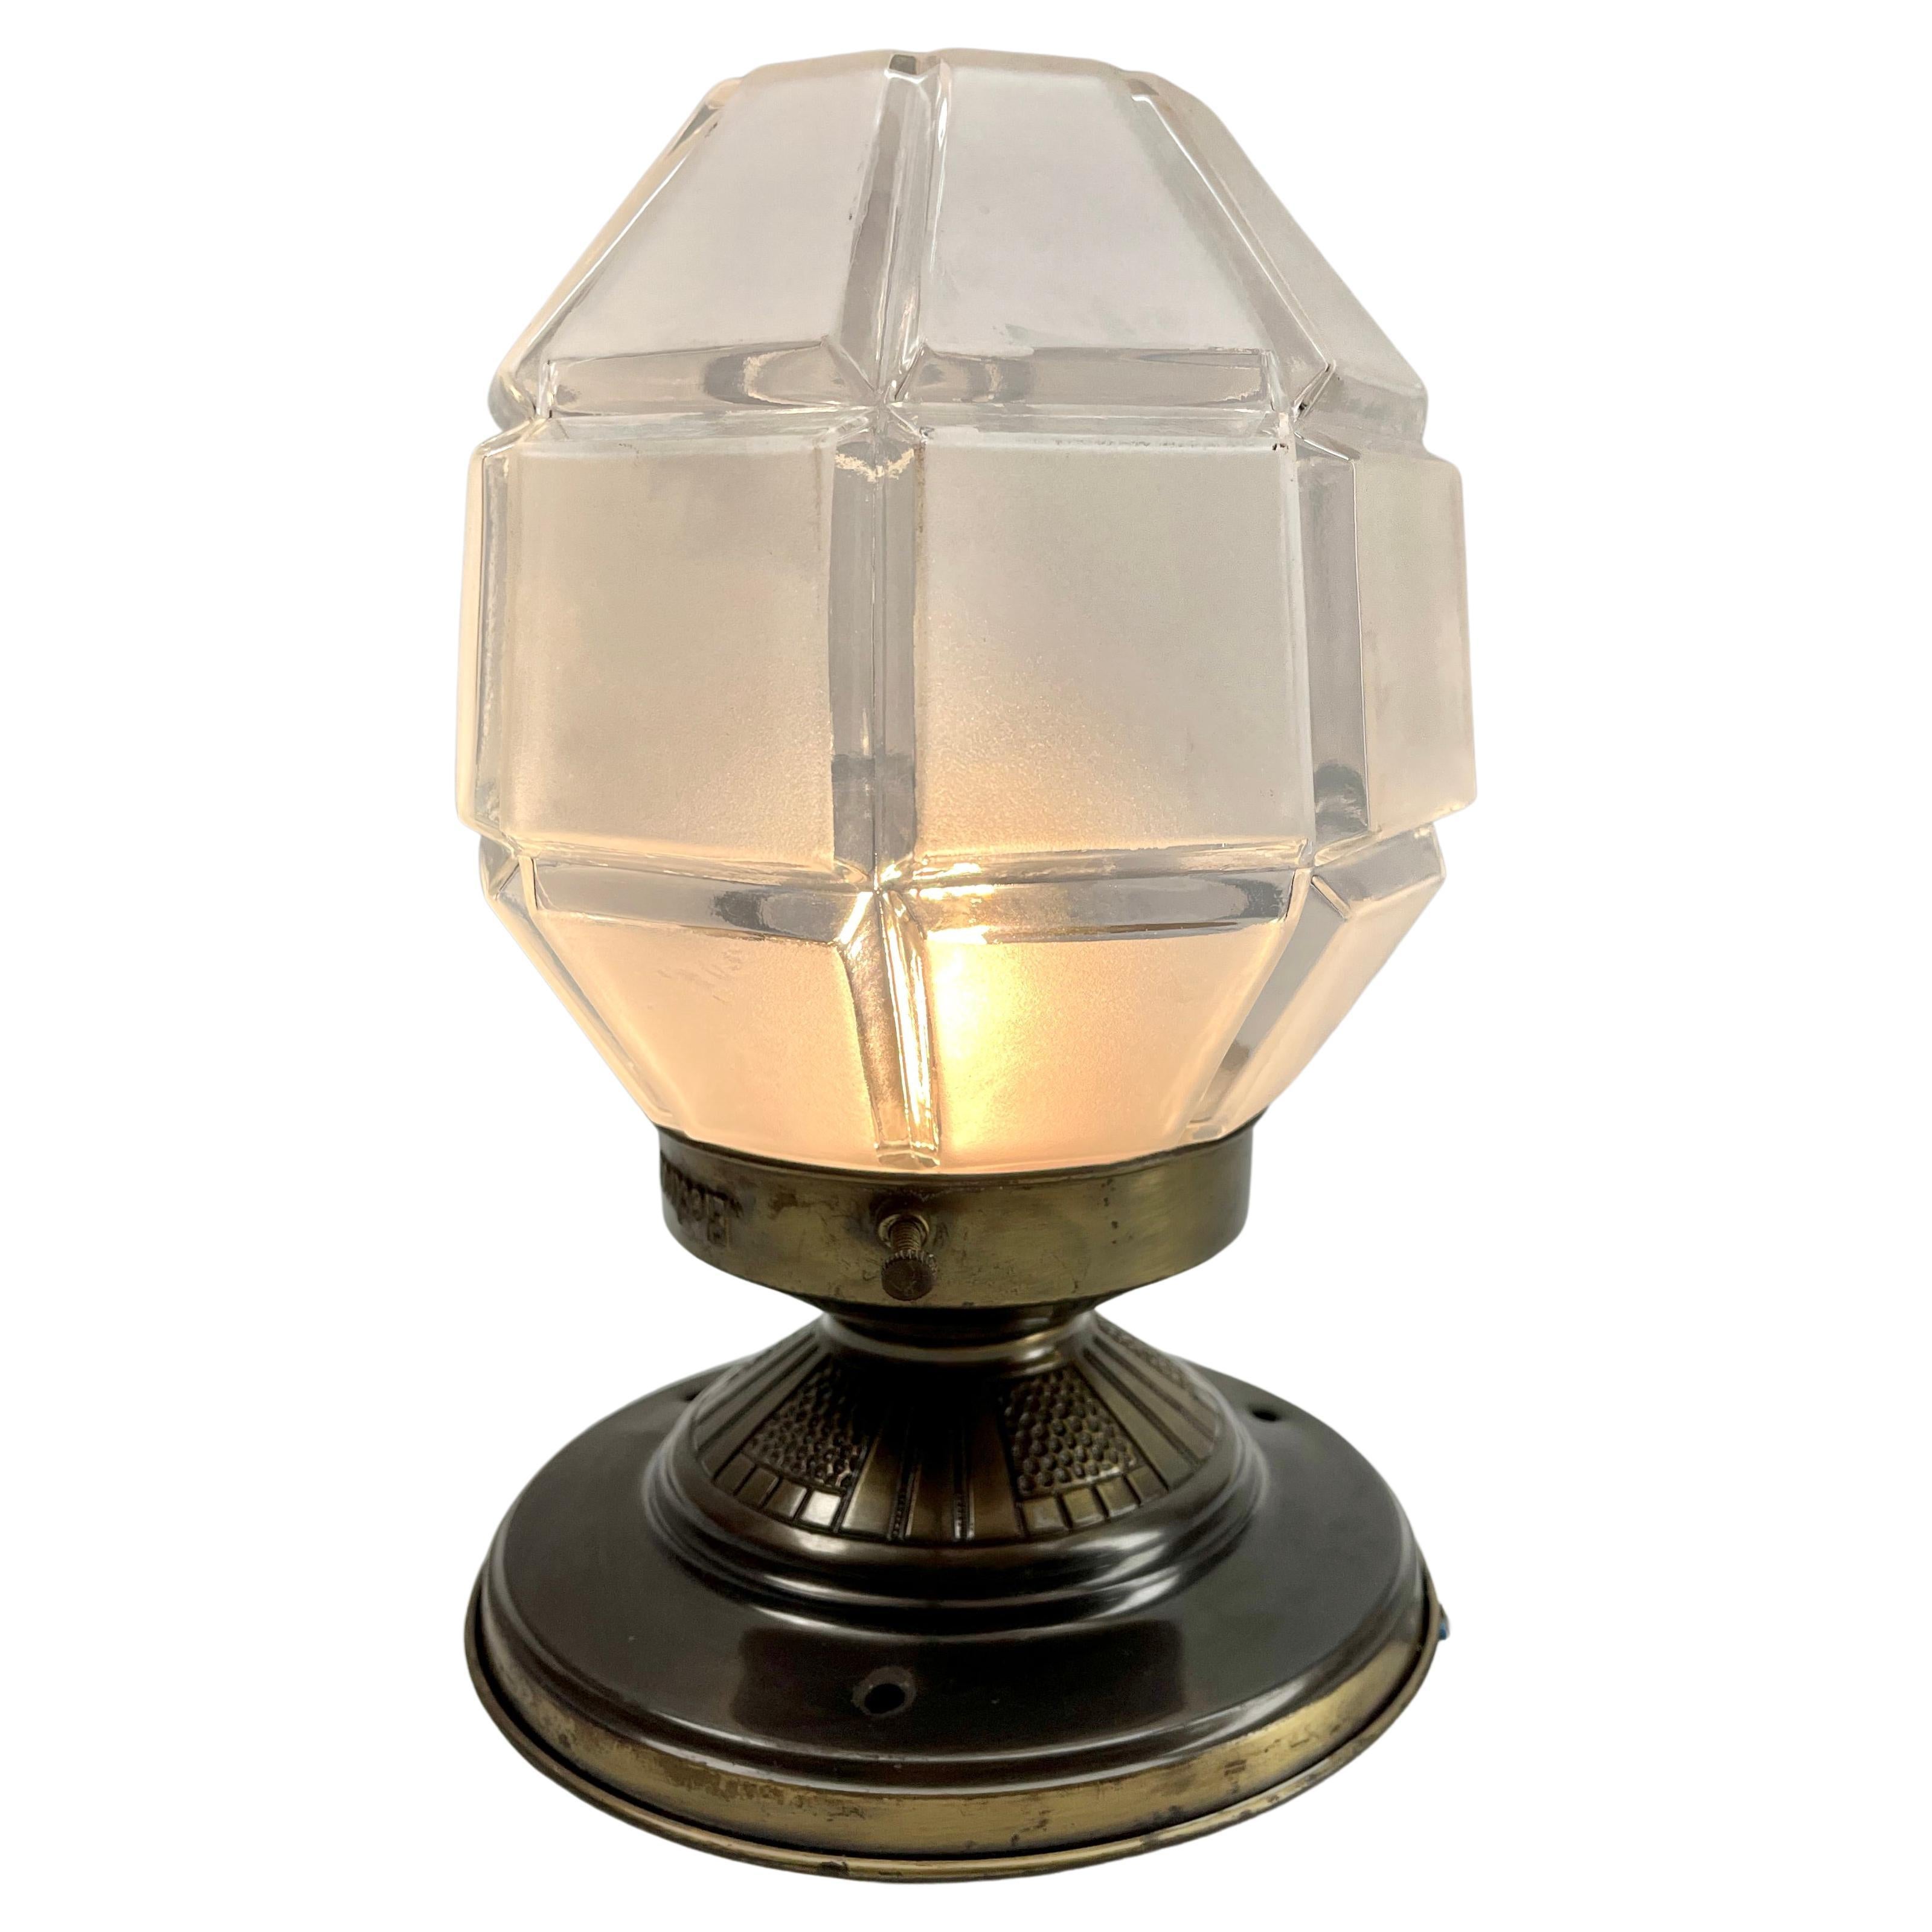 Art Deco Lamp Flush Mount, Tabel ore Ceiling Lamp Signed Electroco Belgium 1930s

We can also use it as a table lamp.
Photography fails to capture the simple elegant illumination provided by this lamp.

In excellent condition and in full working